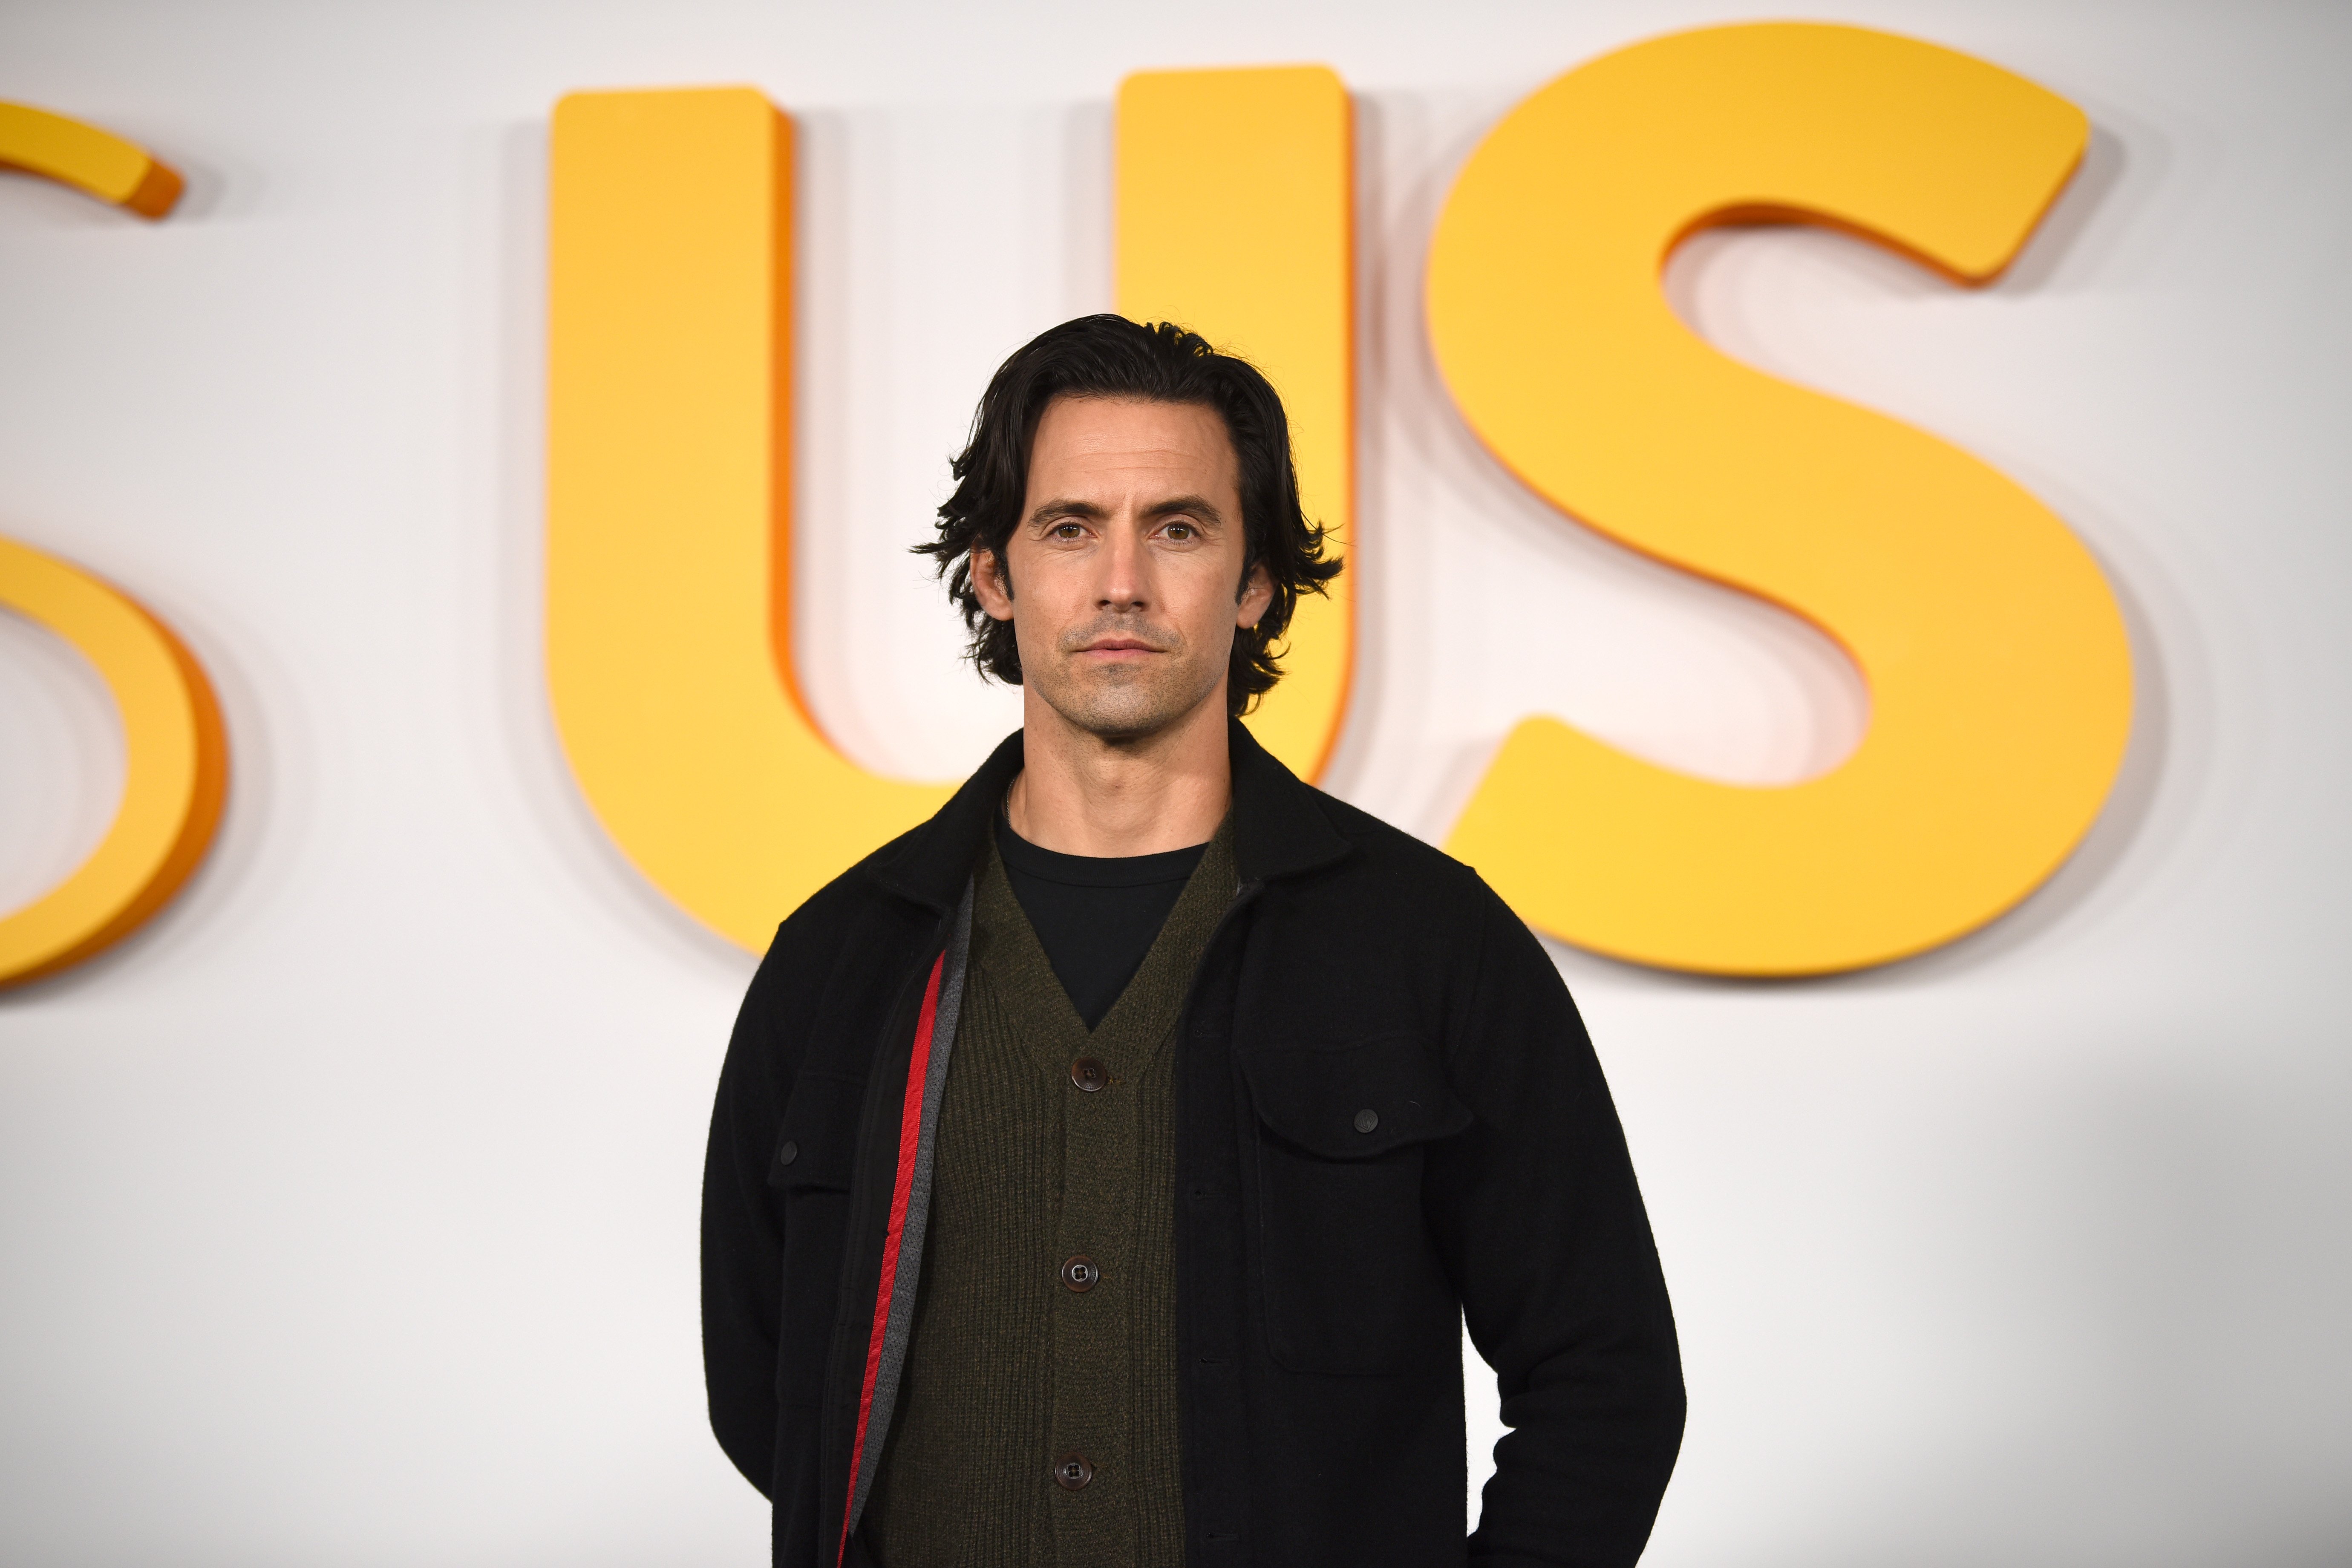 'This Is Us' Season 6 star Milo Ventimiglia, who plays Jack Pearson, wears a black jacket over a green cardigan over a black shirt.